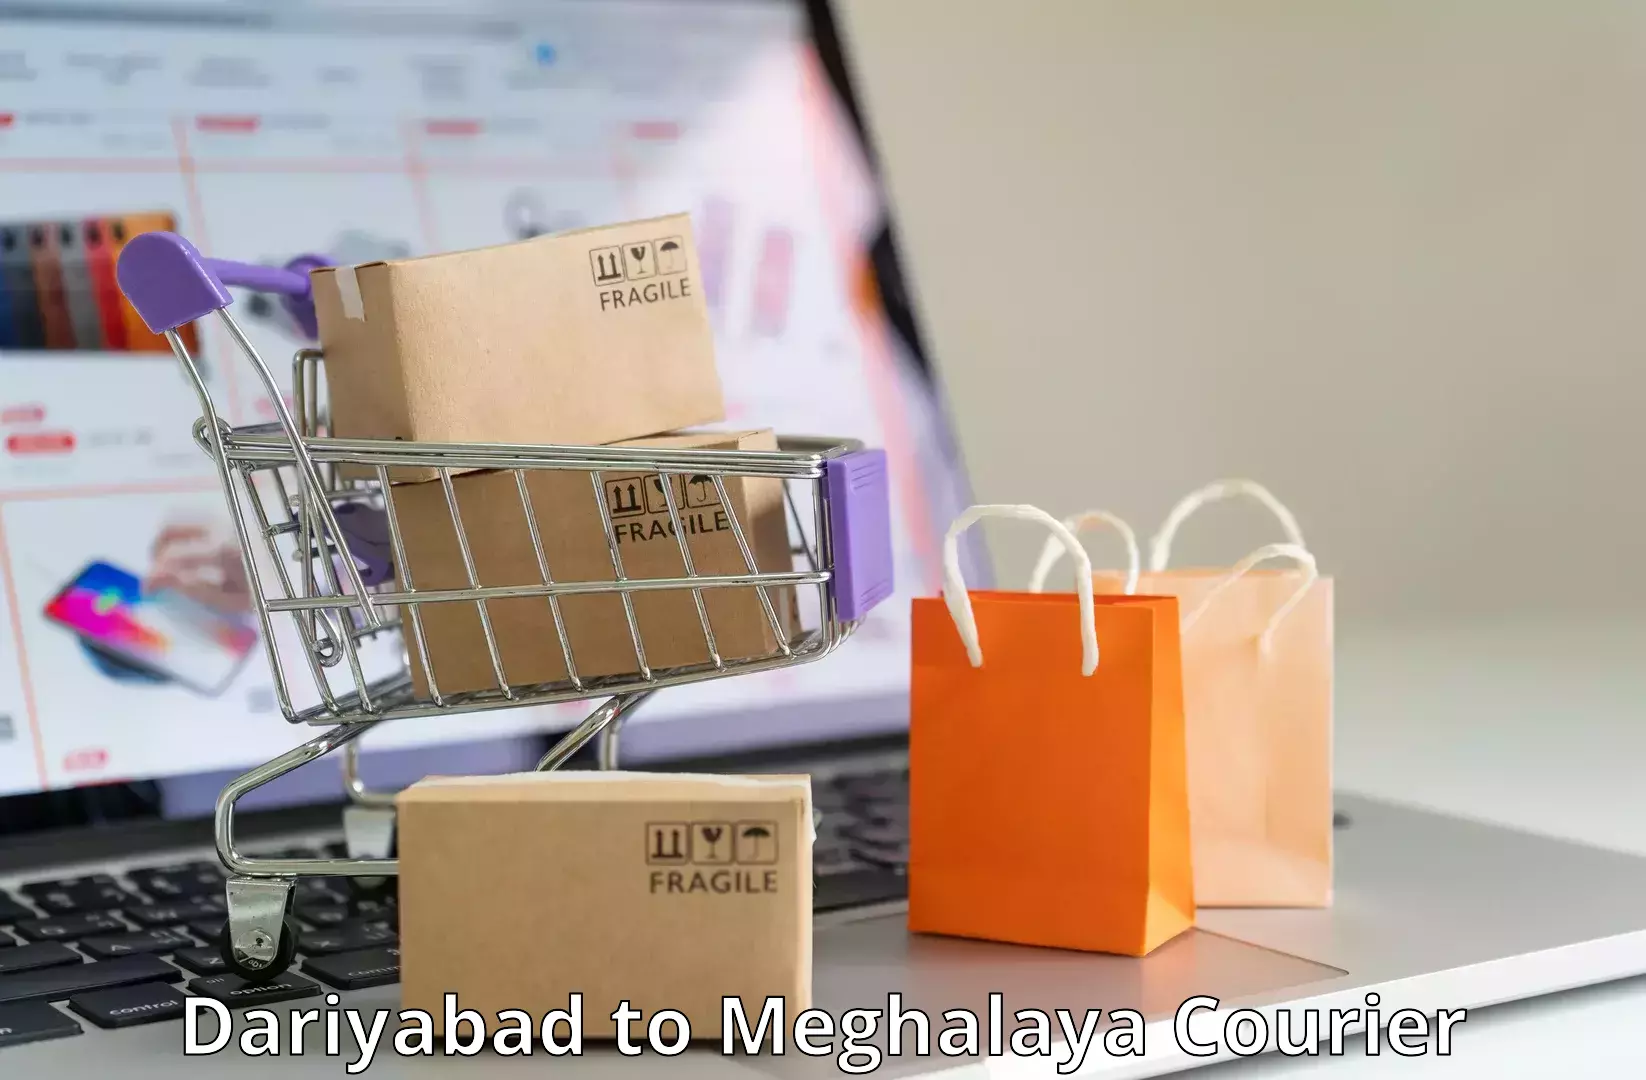 State-of-the-art courier technology in Dariyabad to Shillong